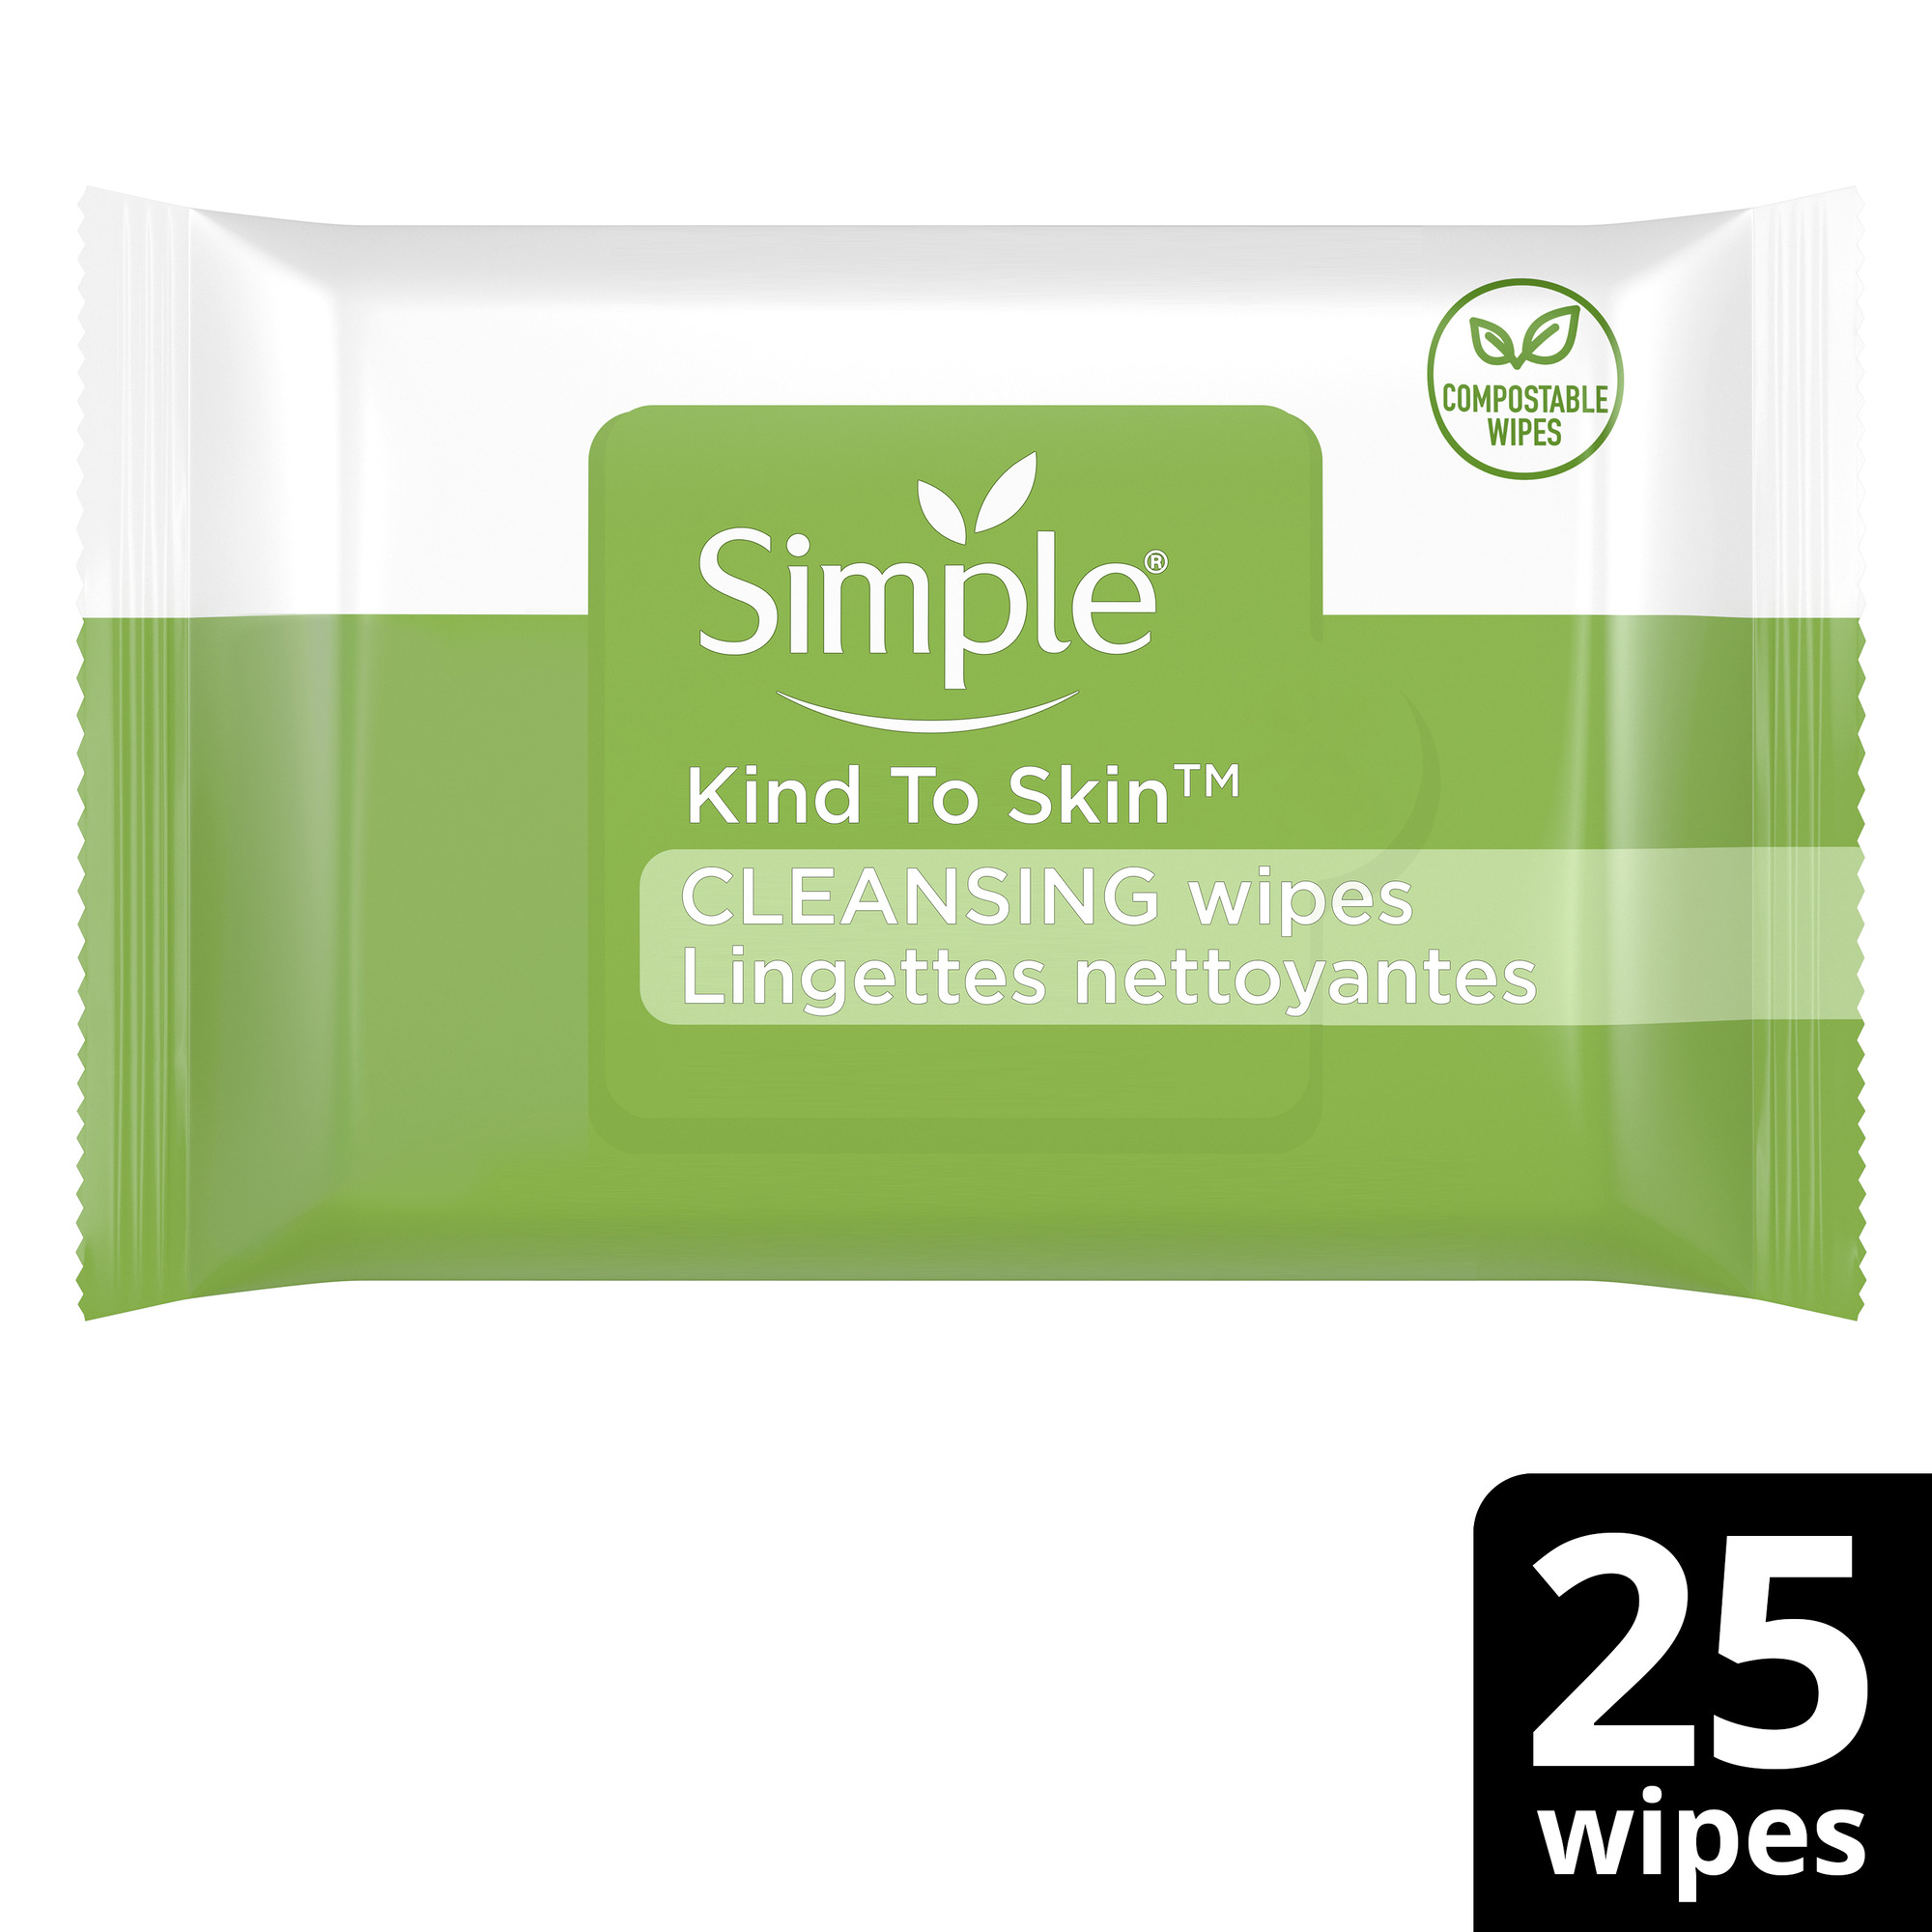 Simple Kind to Skin Facial Wipes Cleansing Free from color and dye, artificial perfume and harsh chemicals Gentle and Effective Makeup Remover 25 Wipes - image 1 of 12